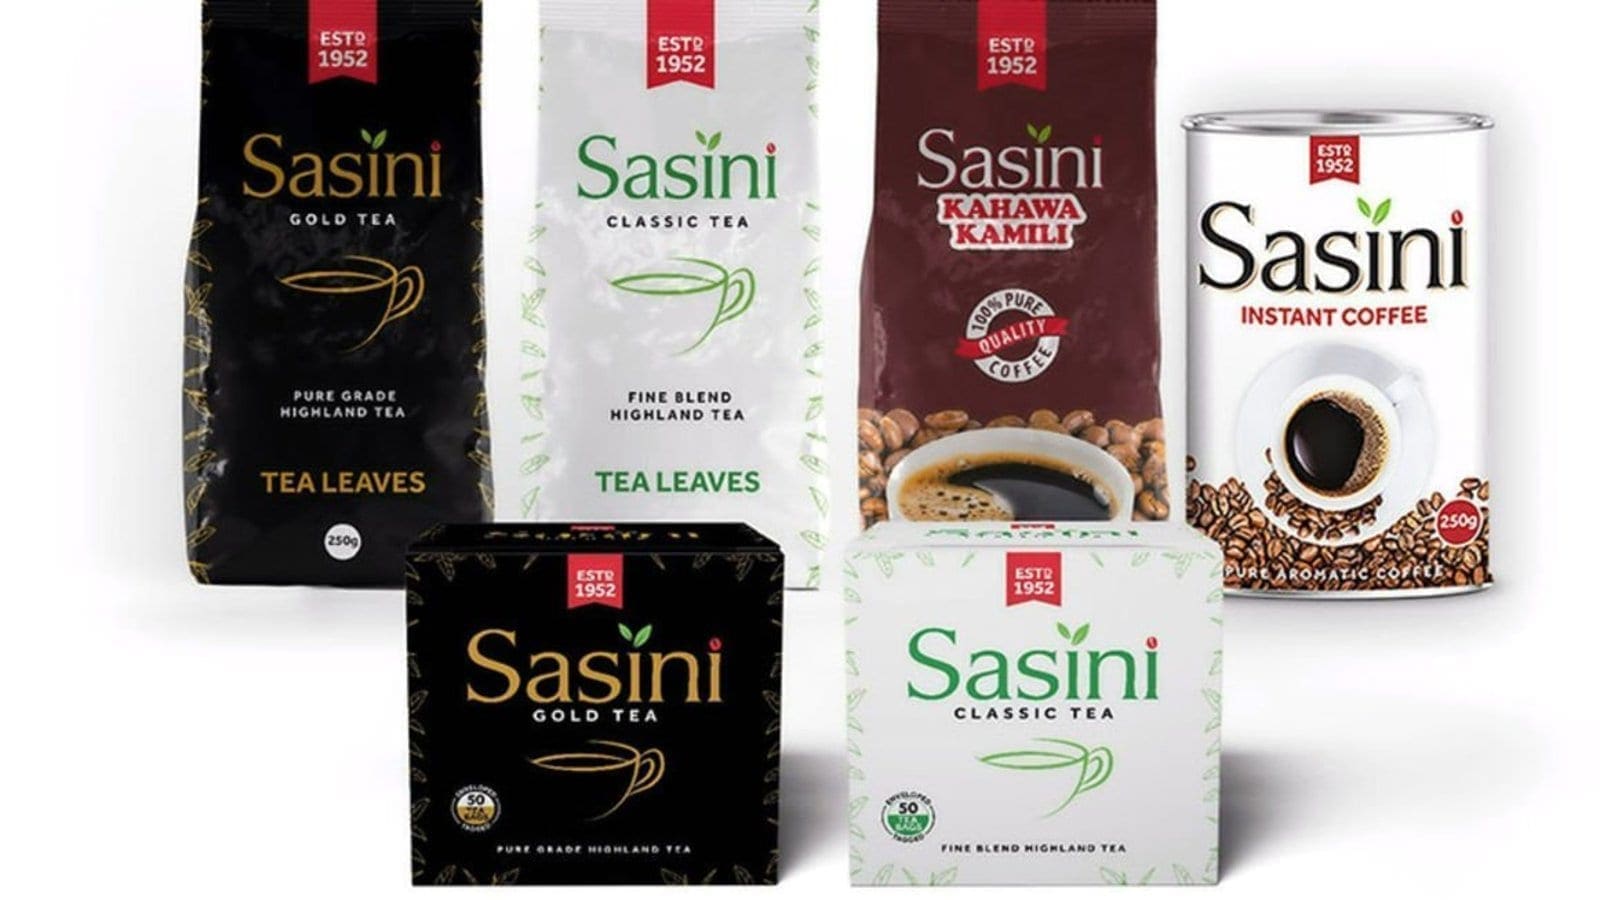 Agricultural commodity exporter Sasini records full year profit gain on back of favourable market conditions